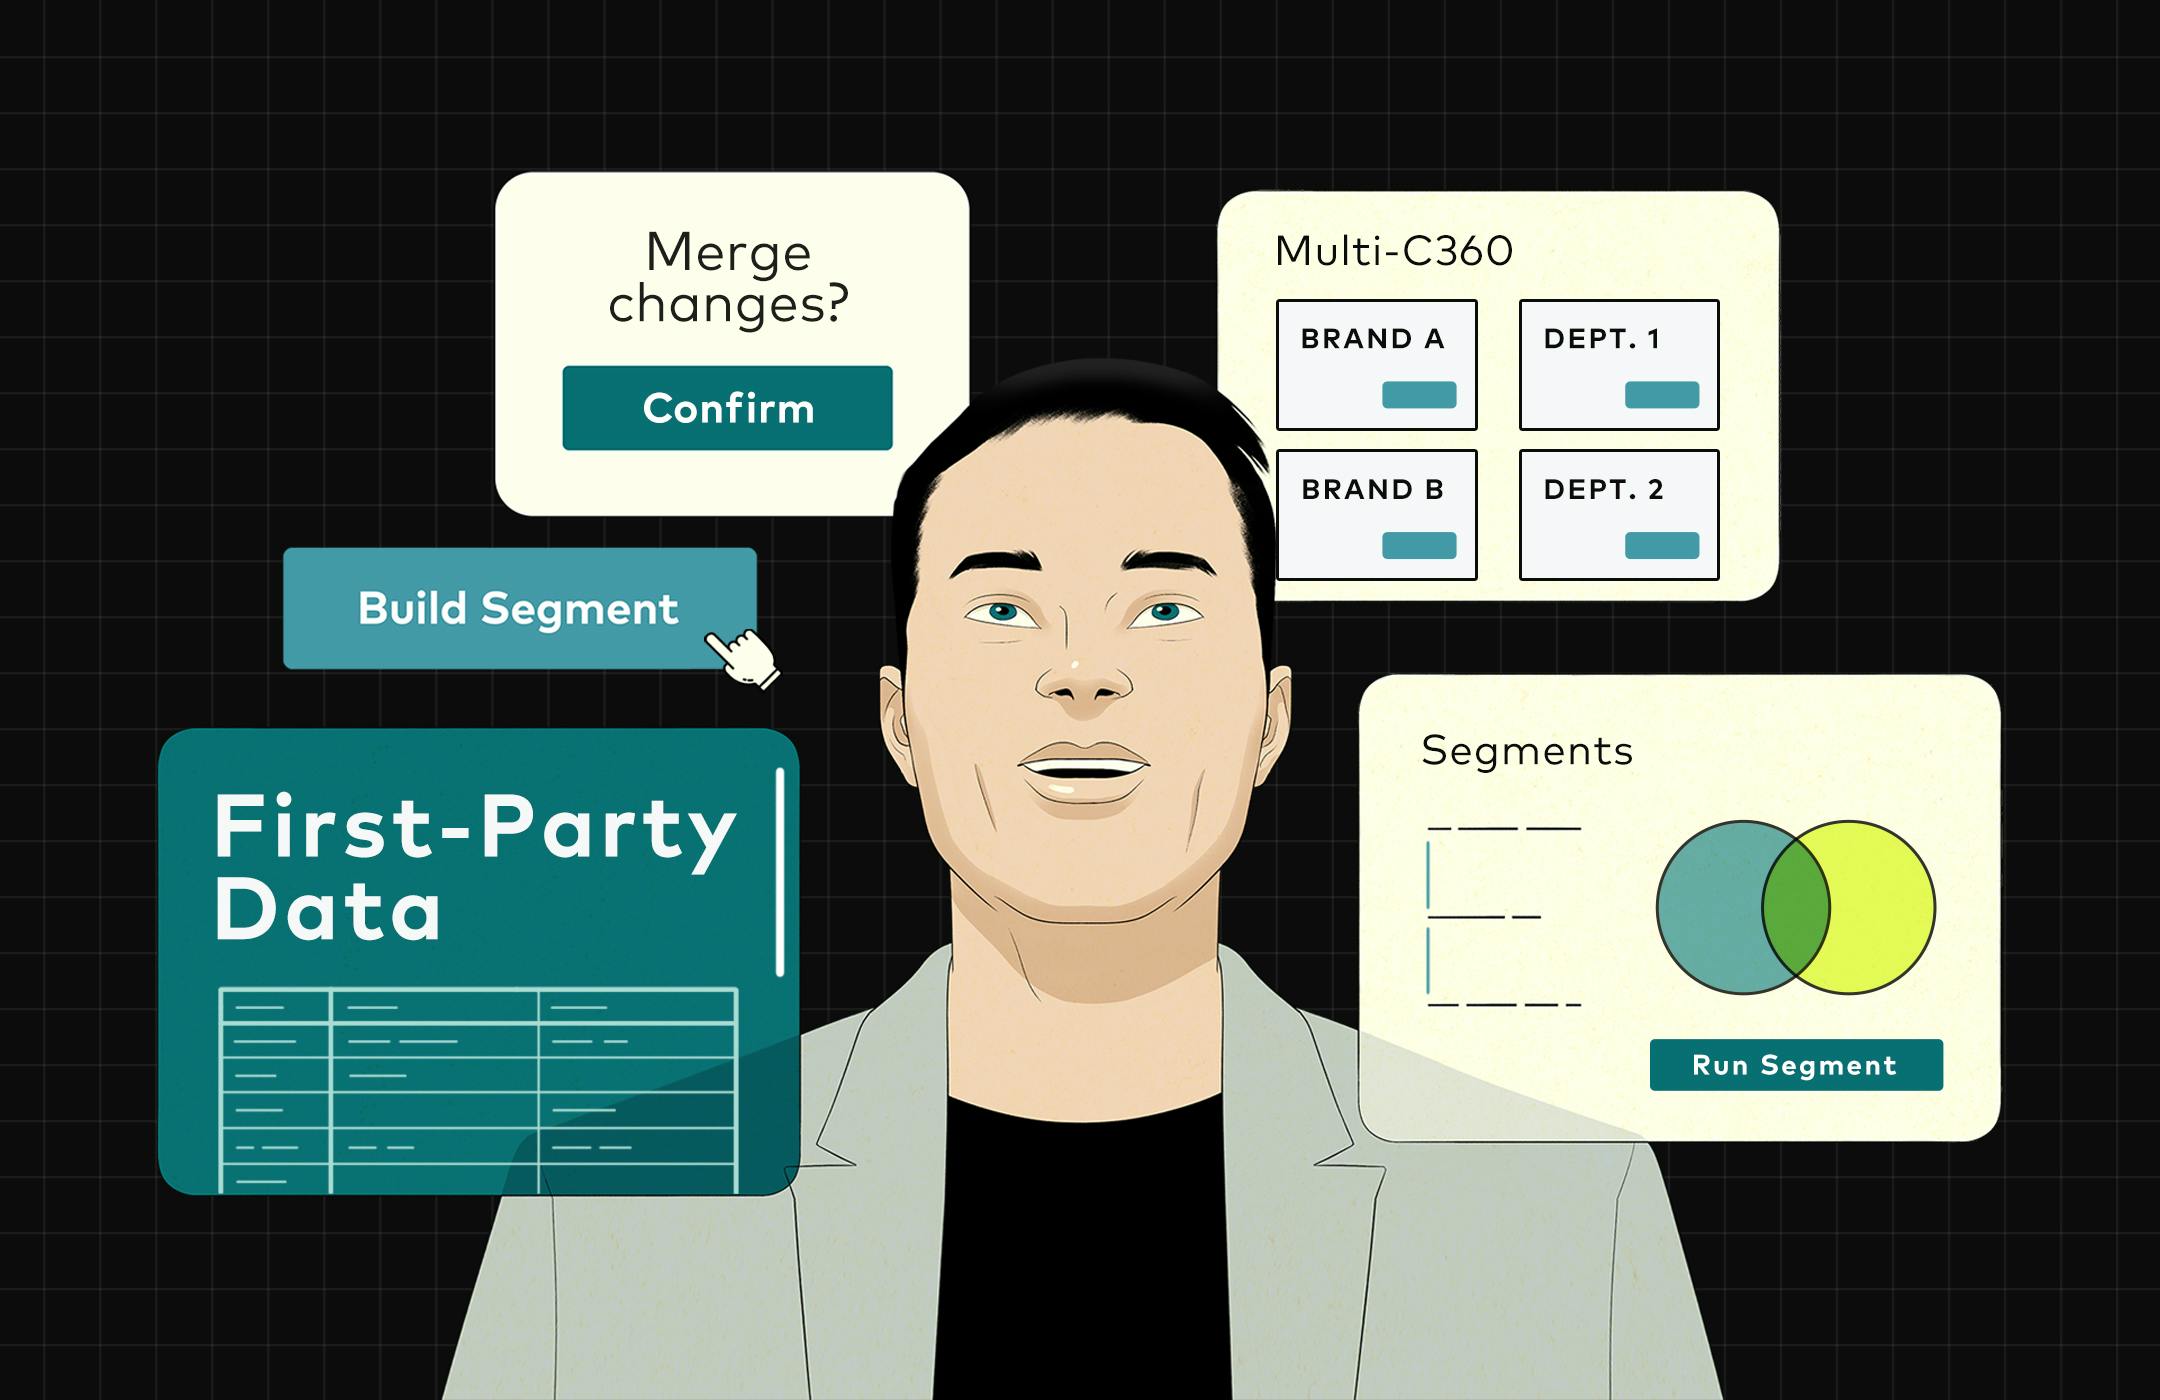 Illustration of a person surrounded by UI elements depicting Amperity Customer 360 Features - Sandboxing, Multi-C360, Segments, First-Party Data